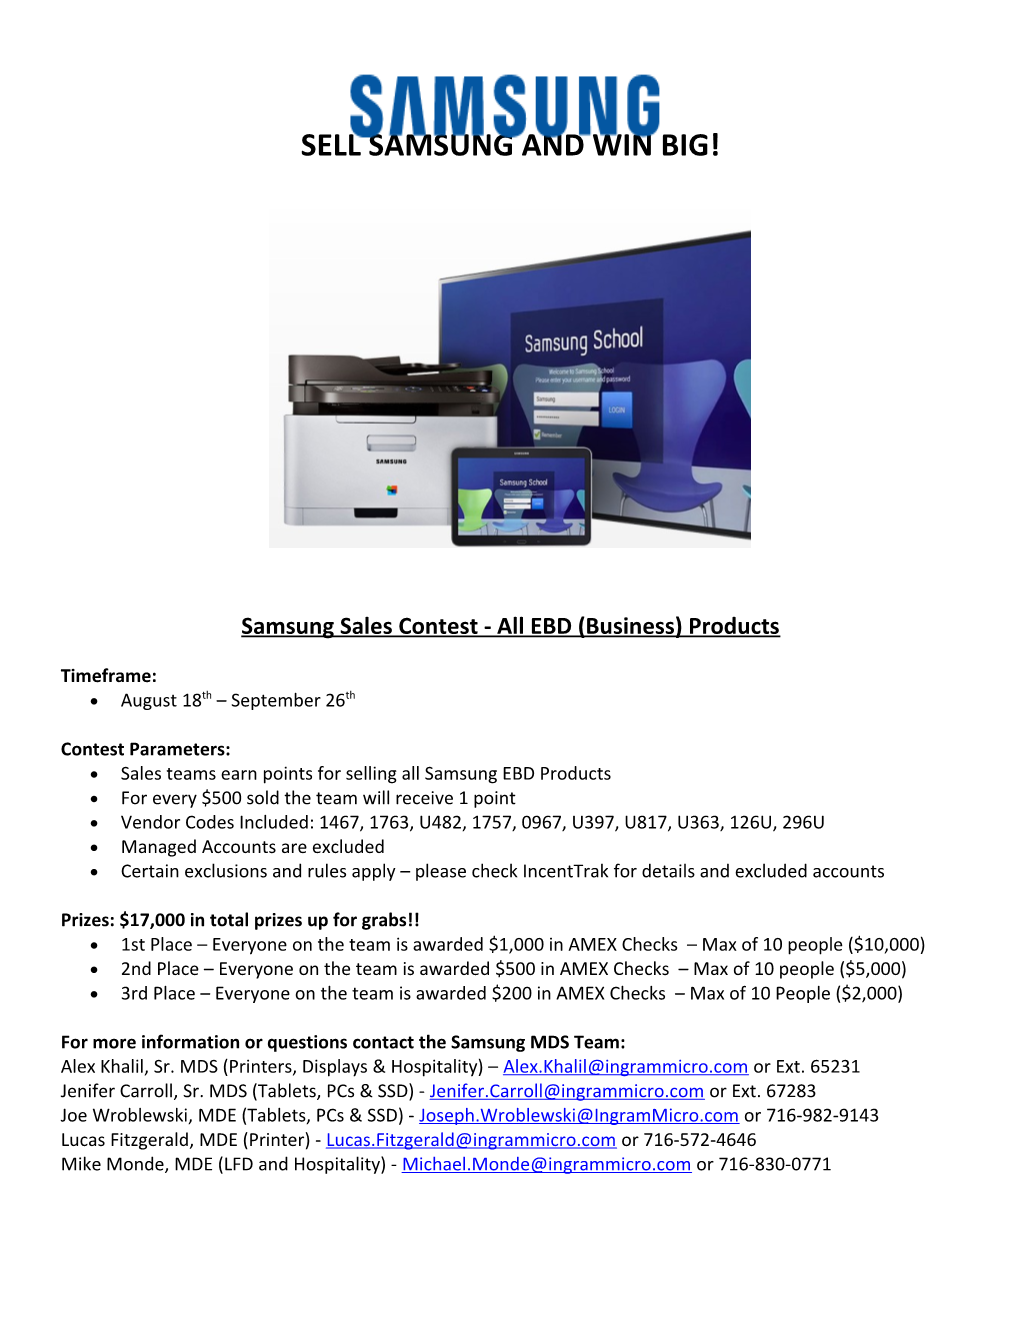 Samsung Sales Contest - All EBD (Business) Products